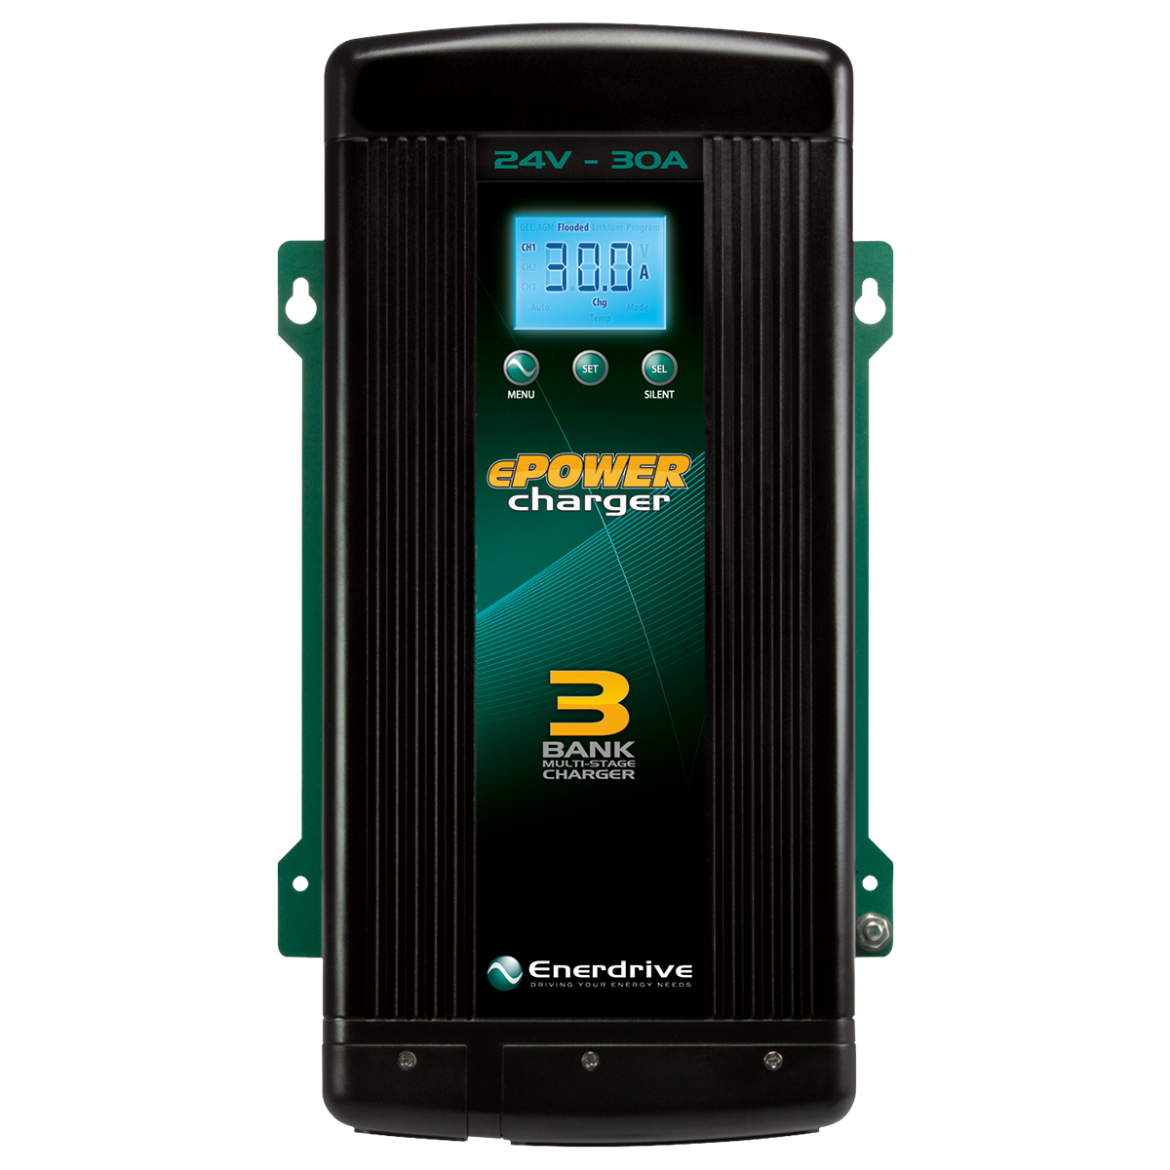 Picture of 24V 30AH ENERDRIVE EPOWER SMART BATTERY CHARGER